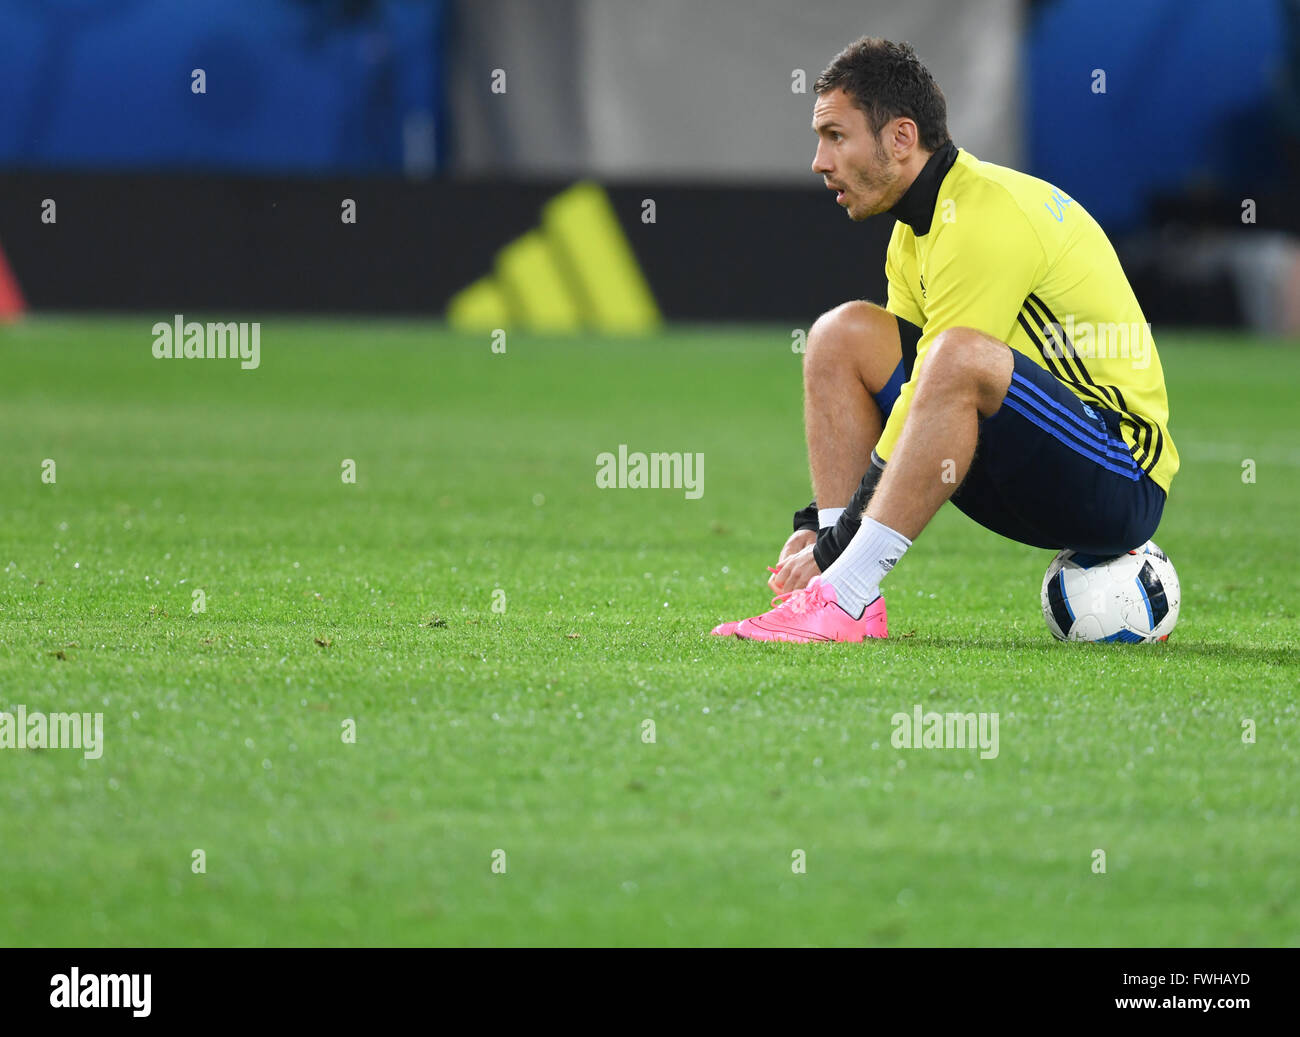 Serhiy Rybalka of Ukraine during a training session at Stade Pierre Mauroy in Lille, France, June 11, 2016. Ukraine will face Germany during the UEFA EURO 2016 on 12 June 2016. Photo: Arne Dedert/dpa Stock Photo